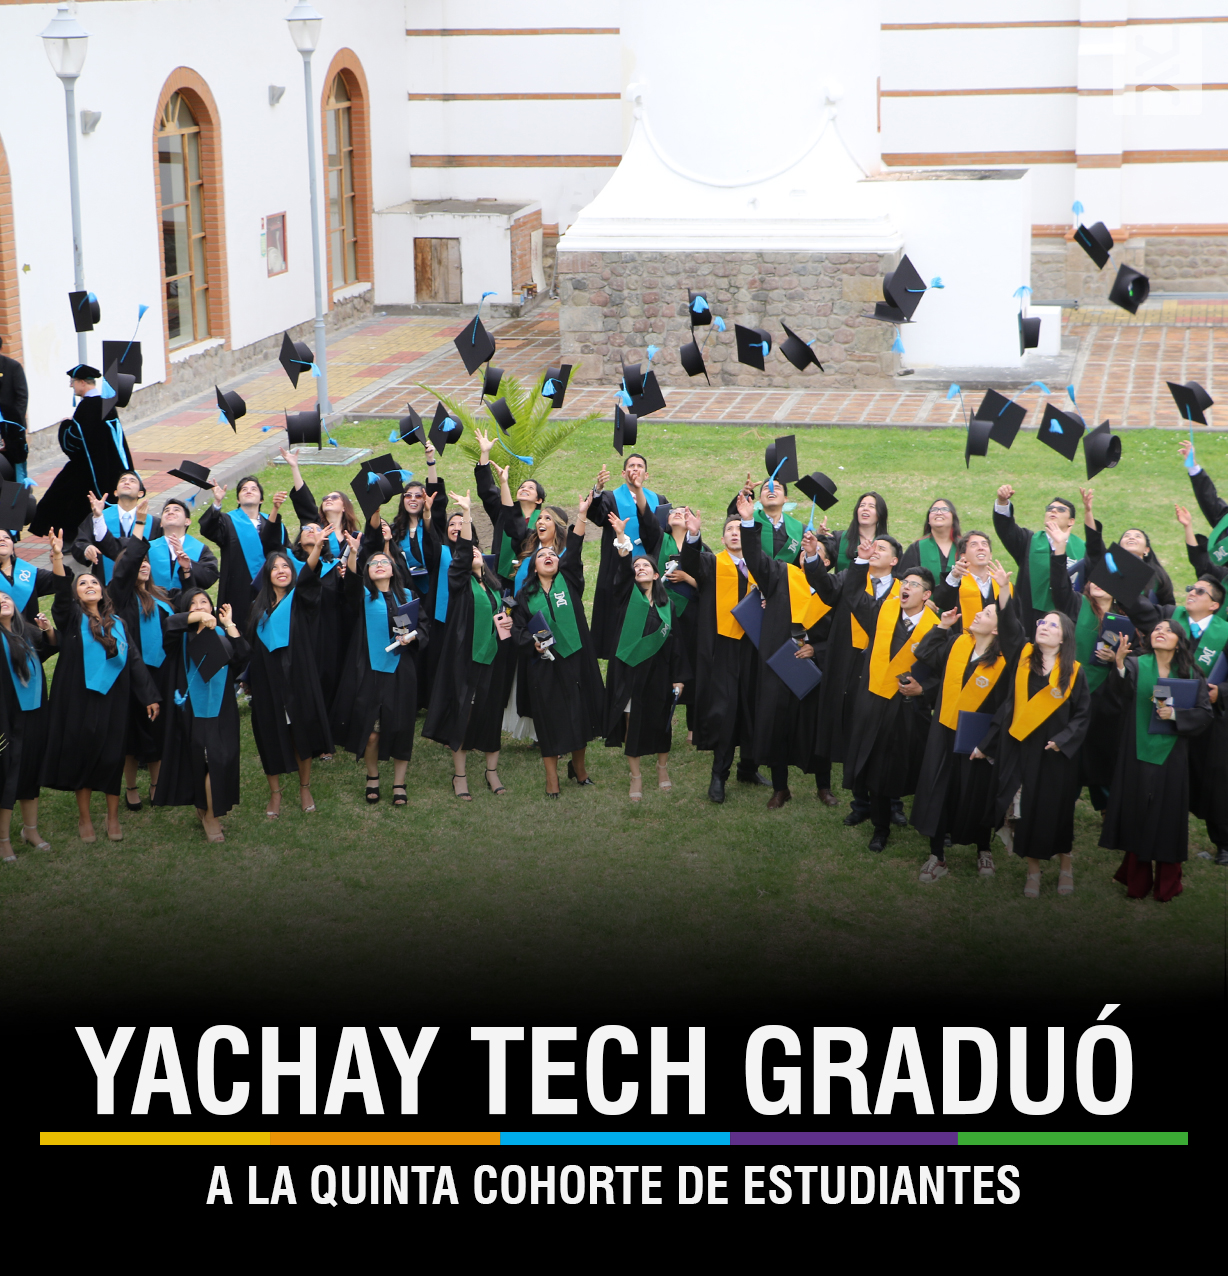 YACHAY TECH GRADUATED ITS FIFTH CLASS OF STUDENTS